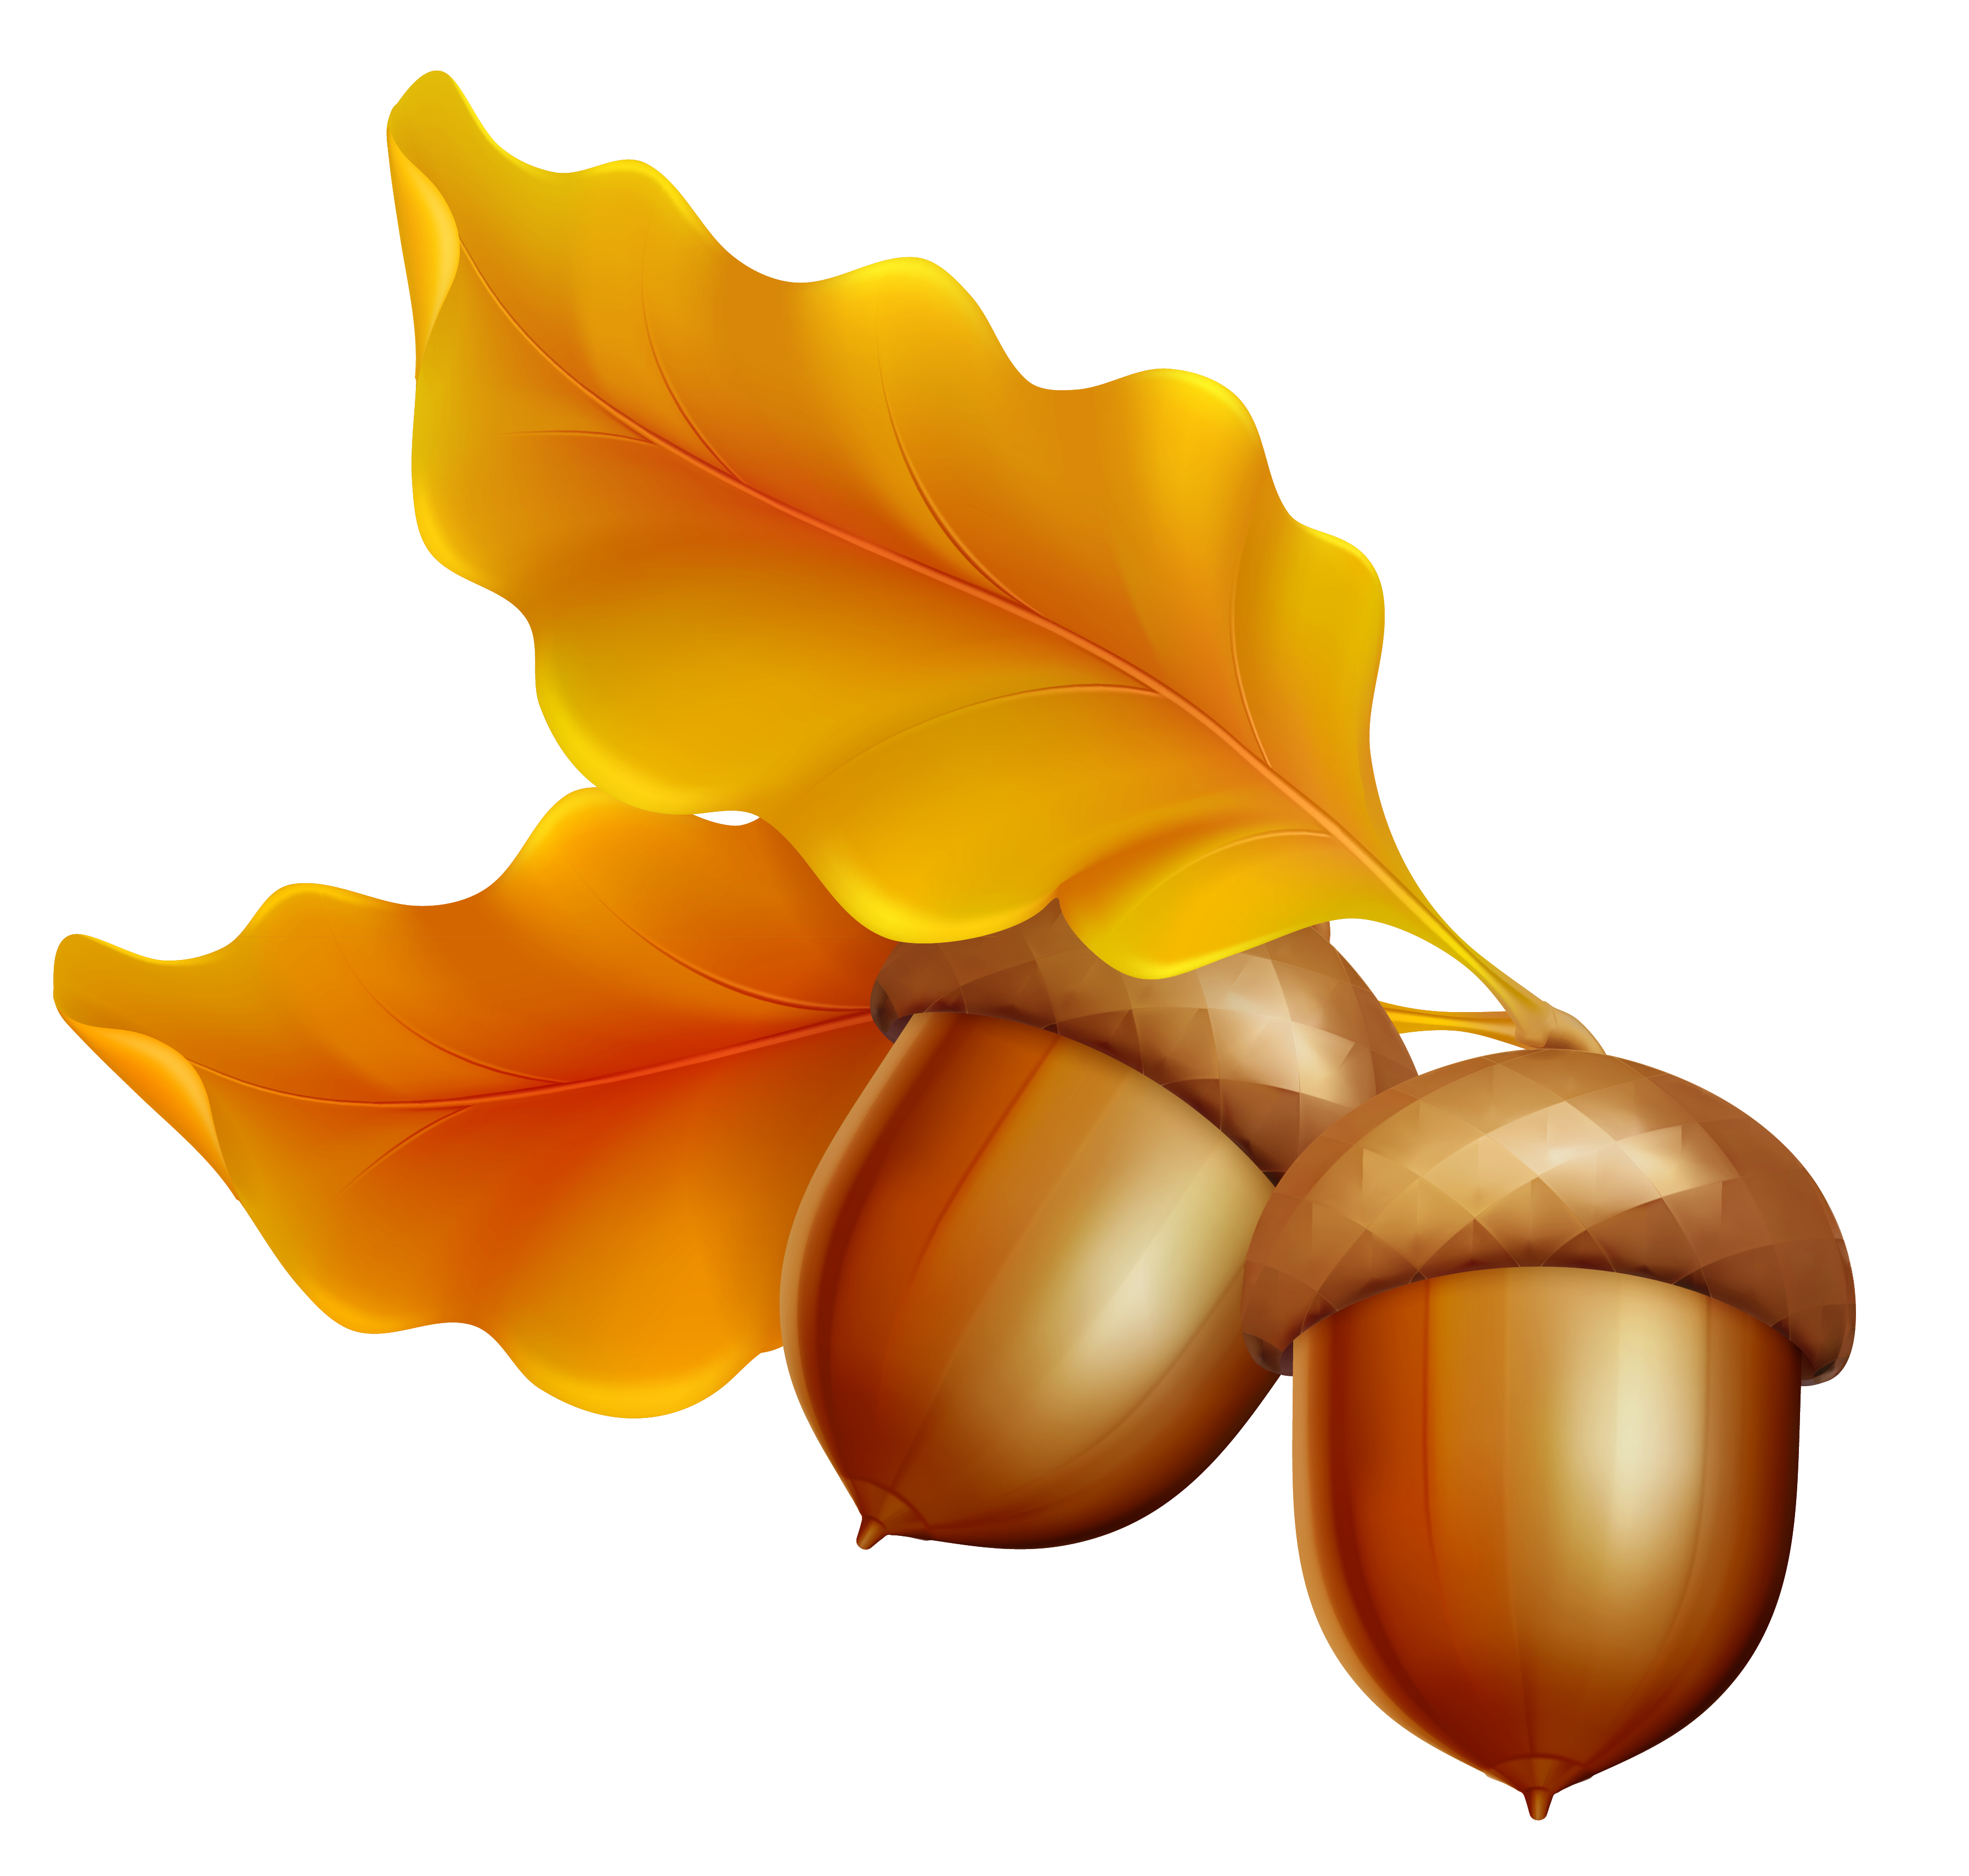 acorns with leaves clipart
